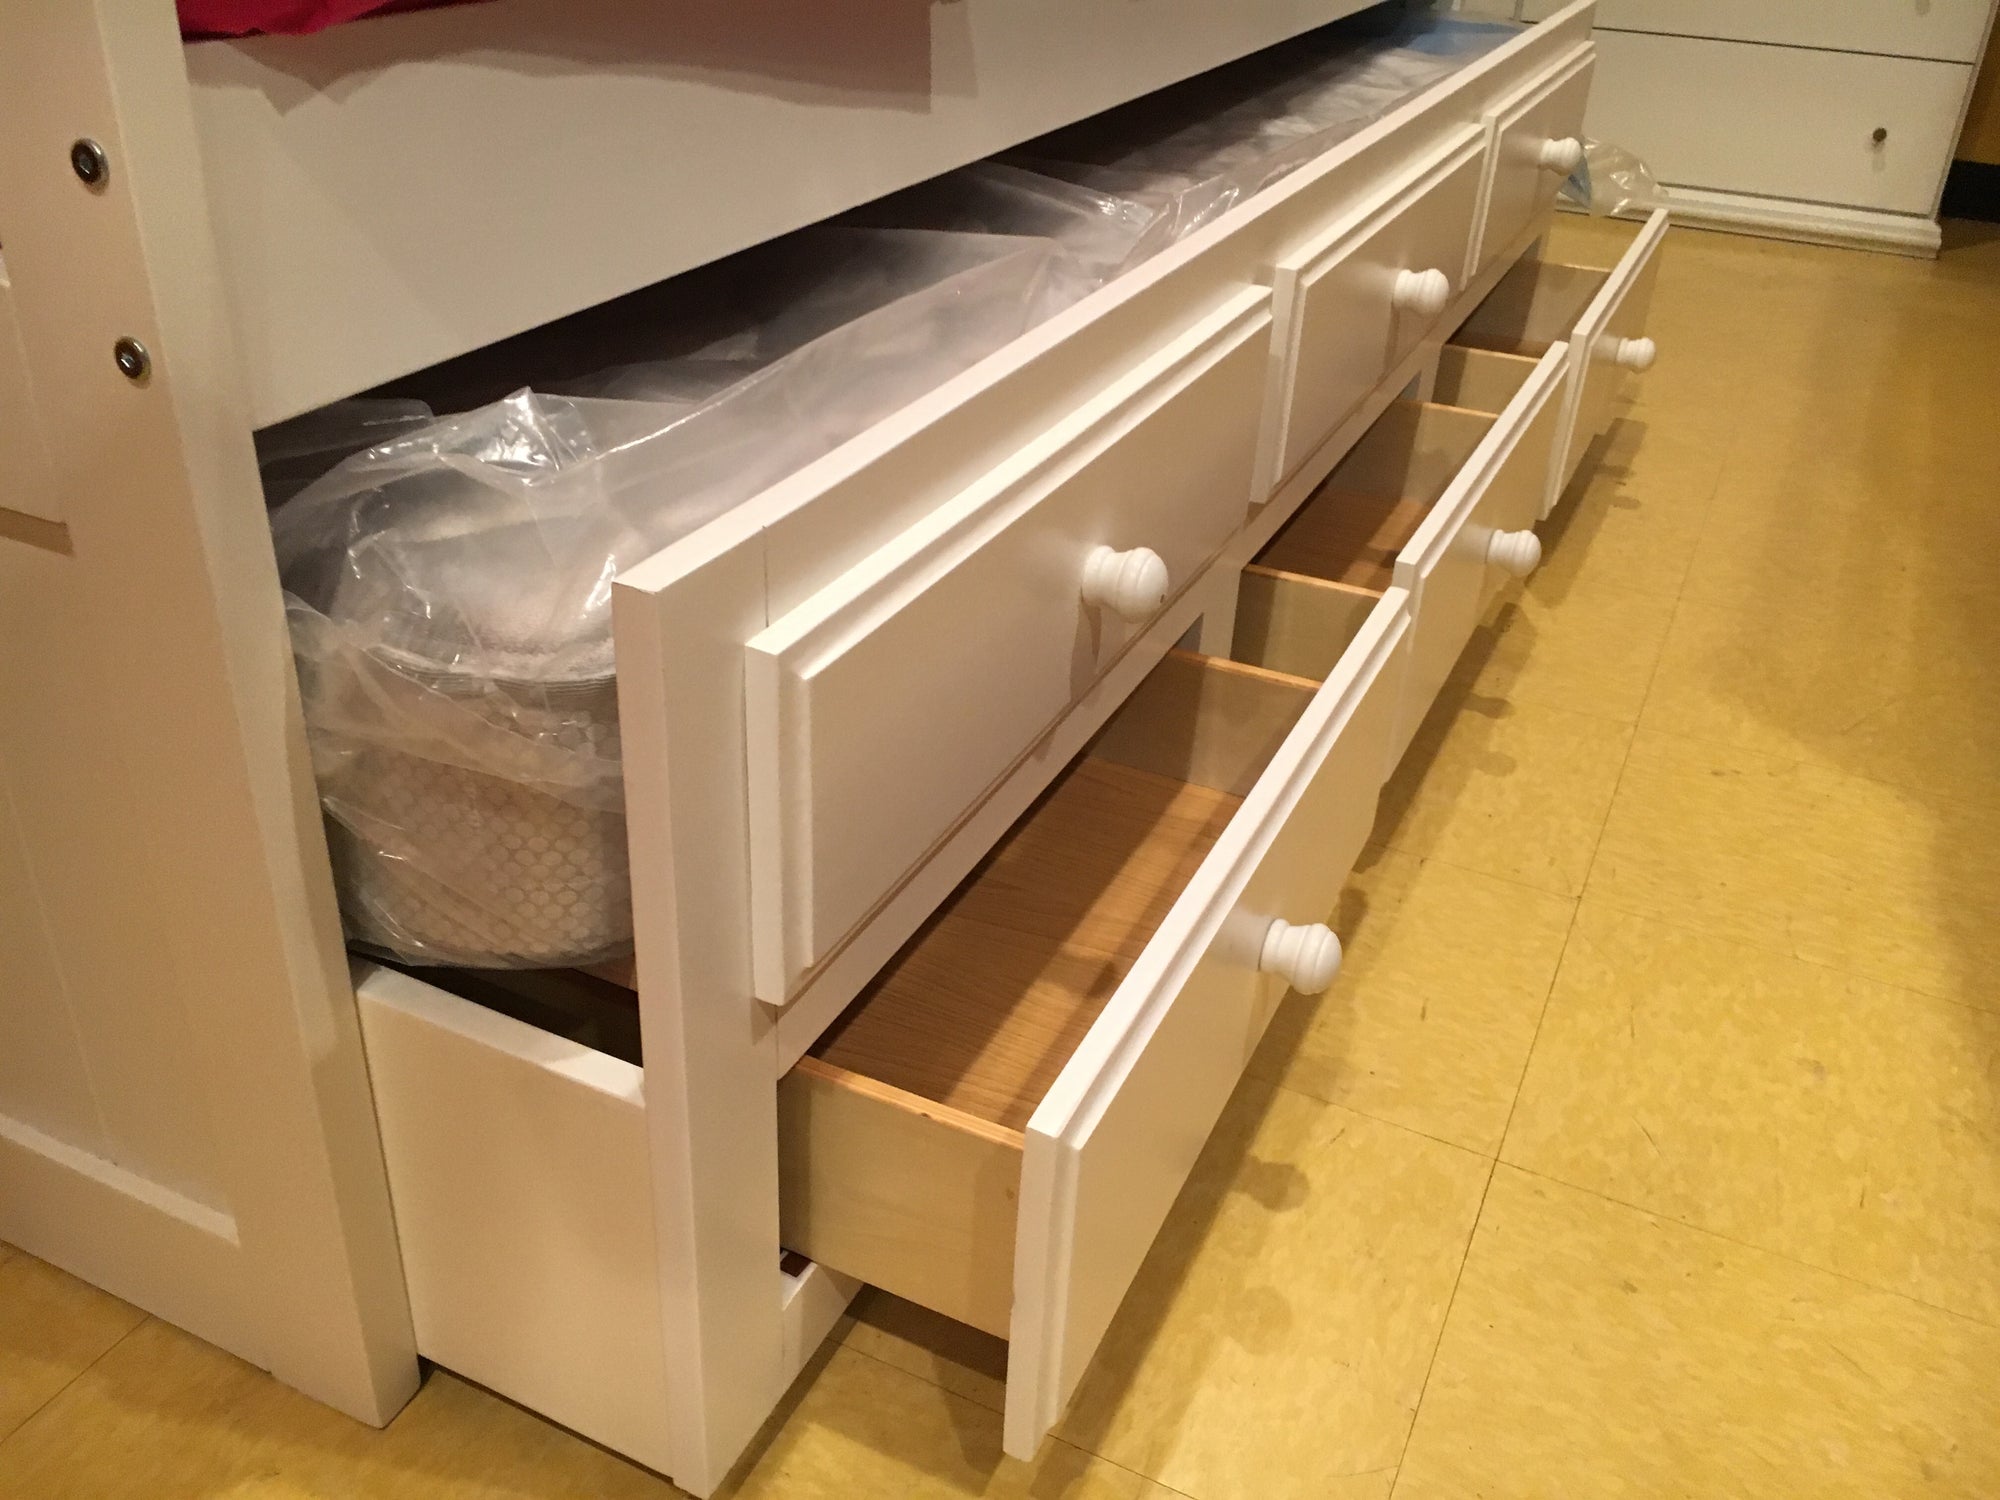 214TW FI-D Twin Mission in White w/Trundle and Drawers